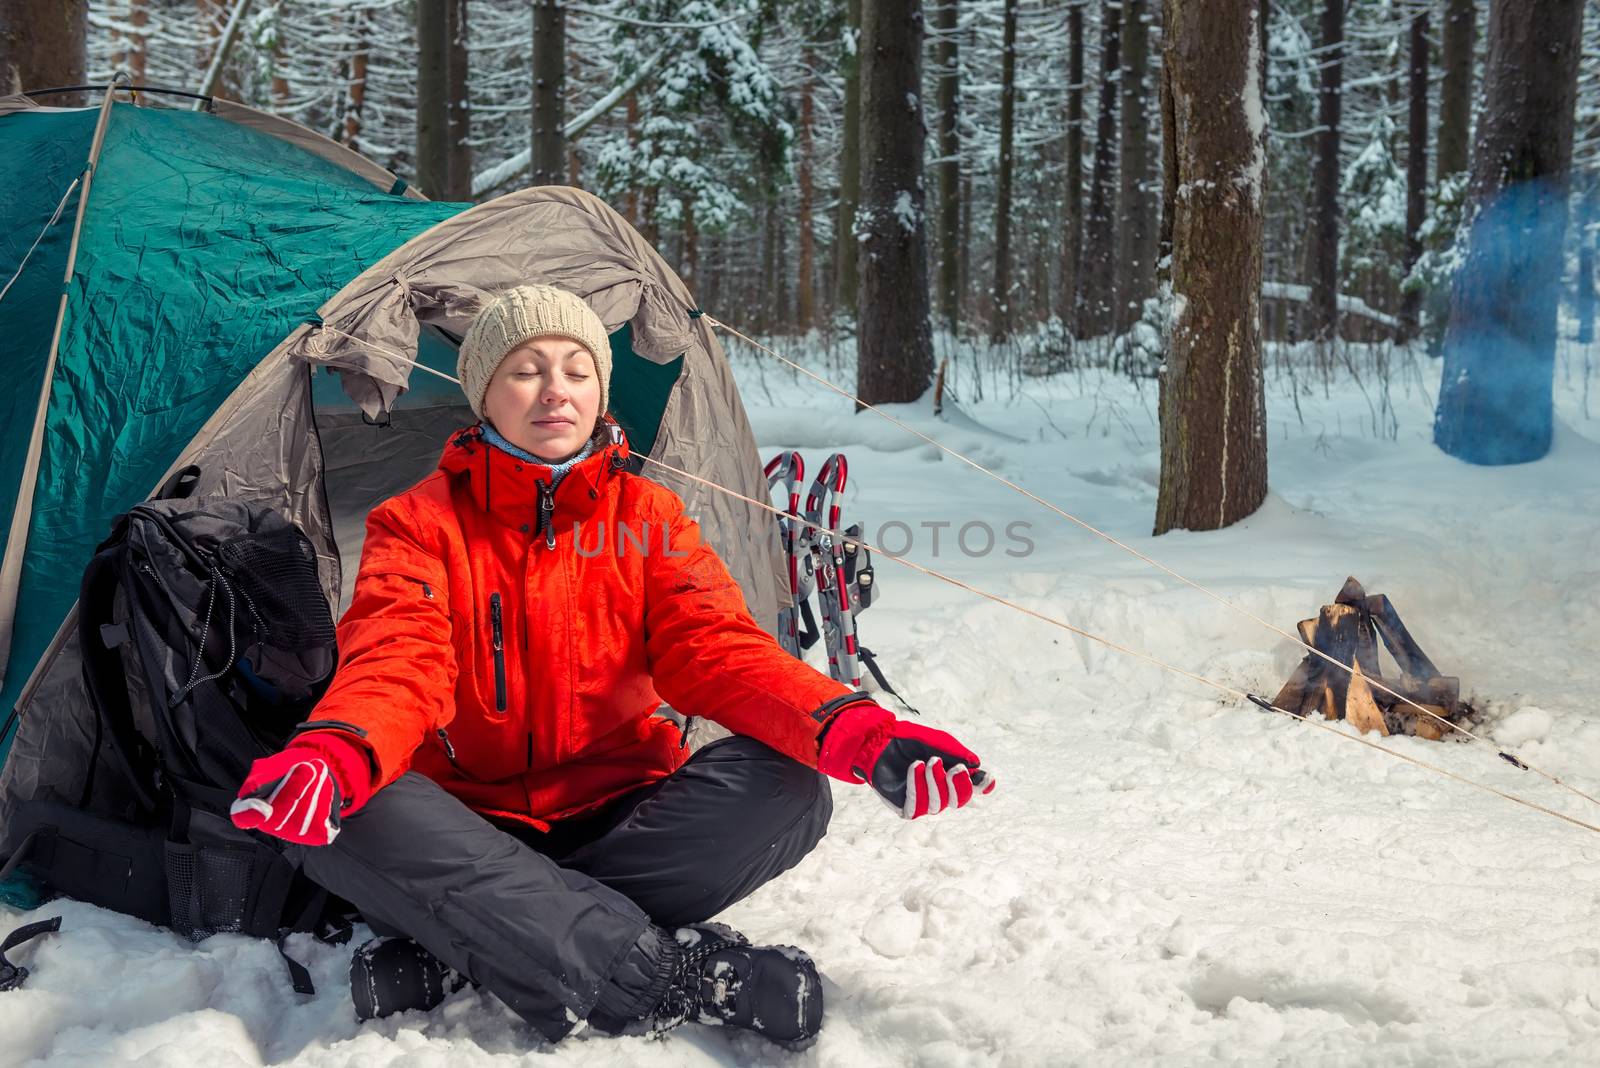 single trekking in the winter forest, girl doing yoga outdoors by kosmsos111